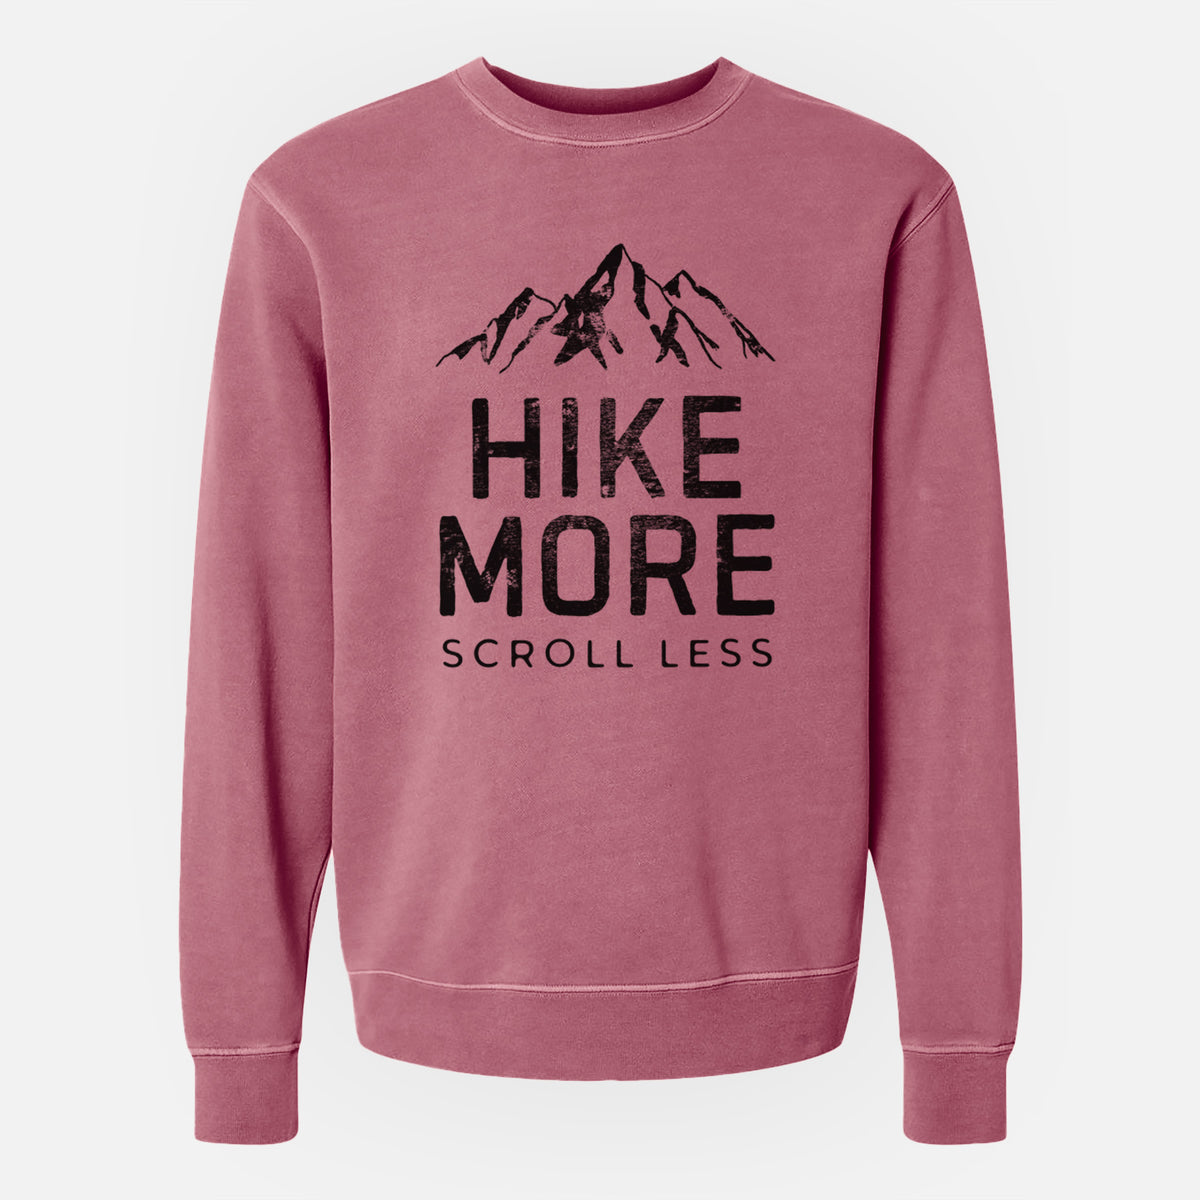 Hike More - Scroll Less - Unisex Pigment Dyed Crew Sweatshirt